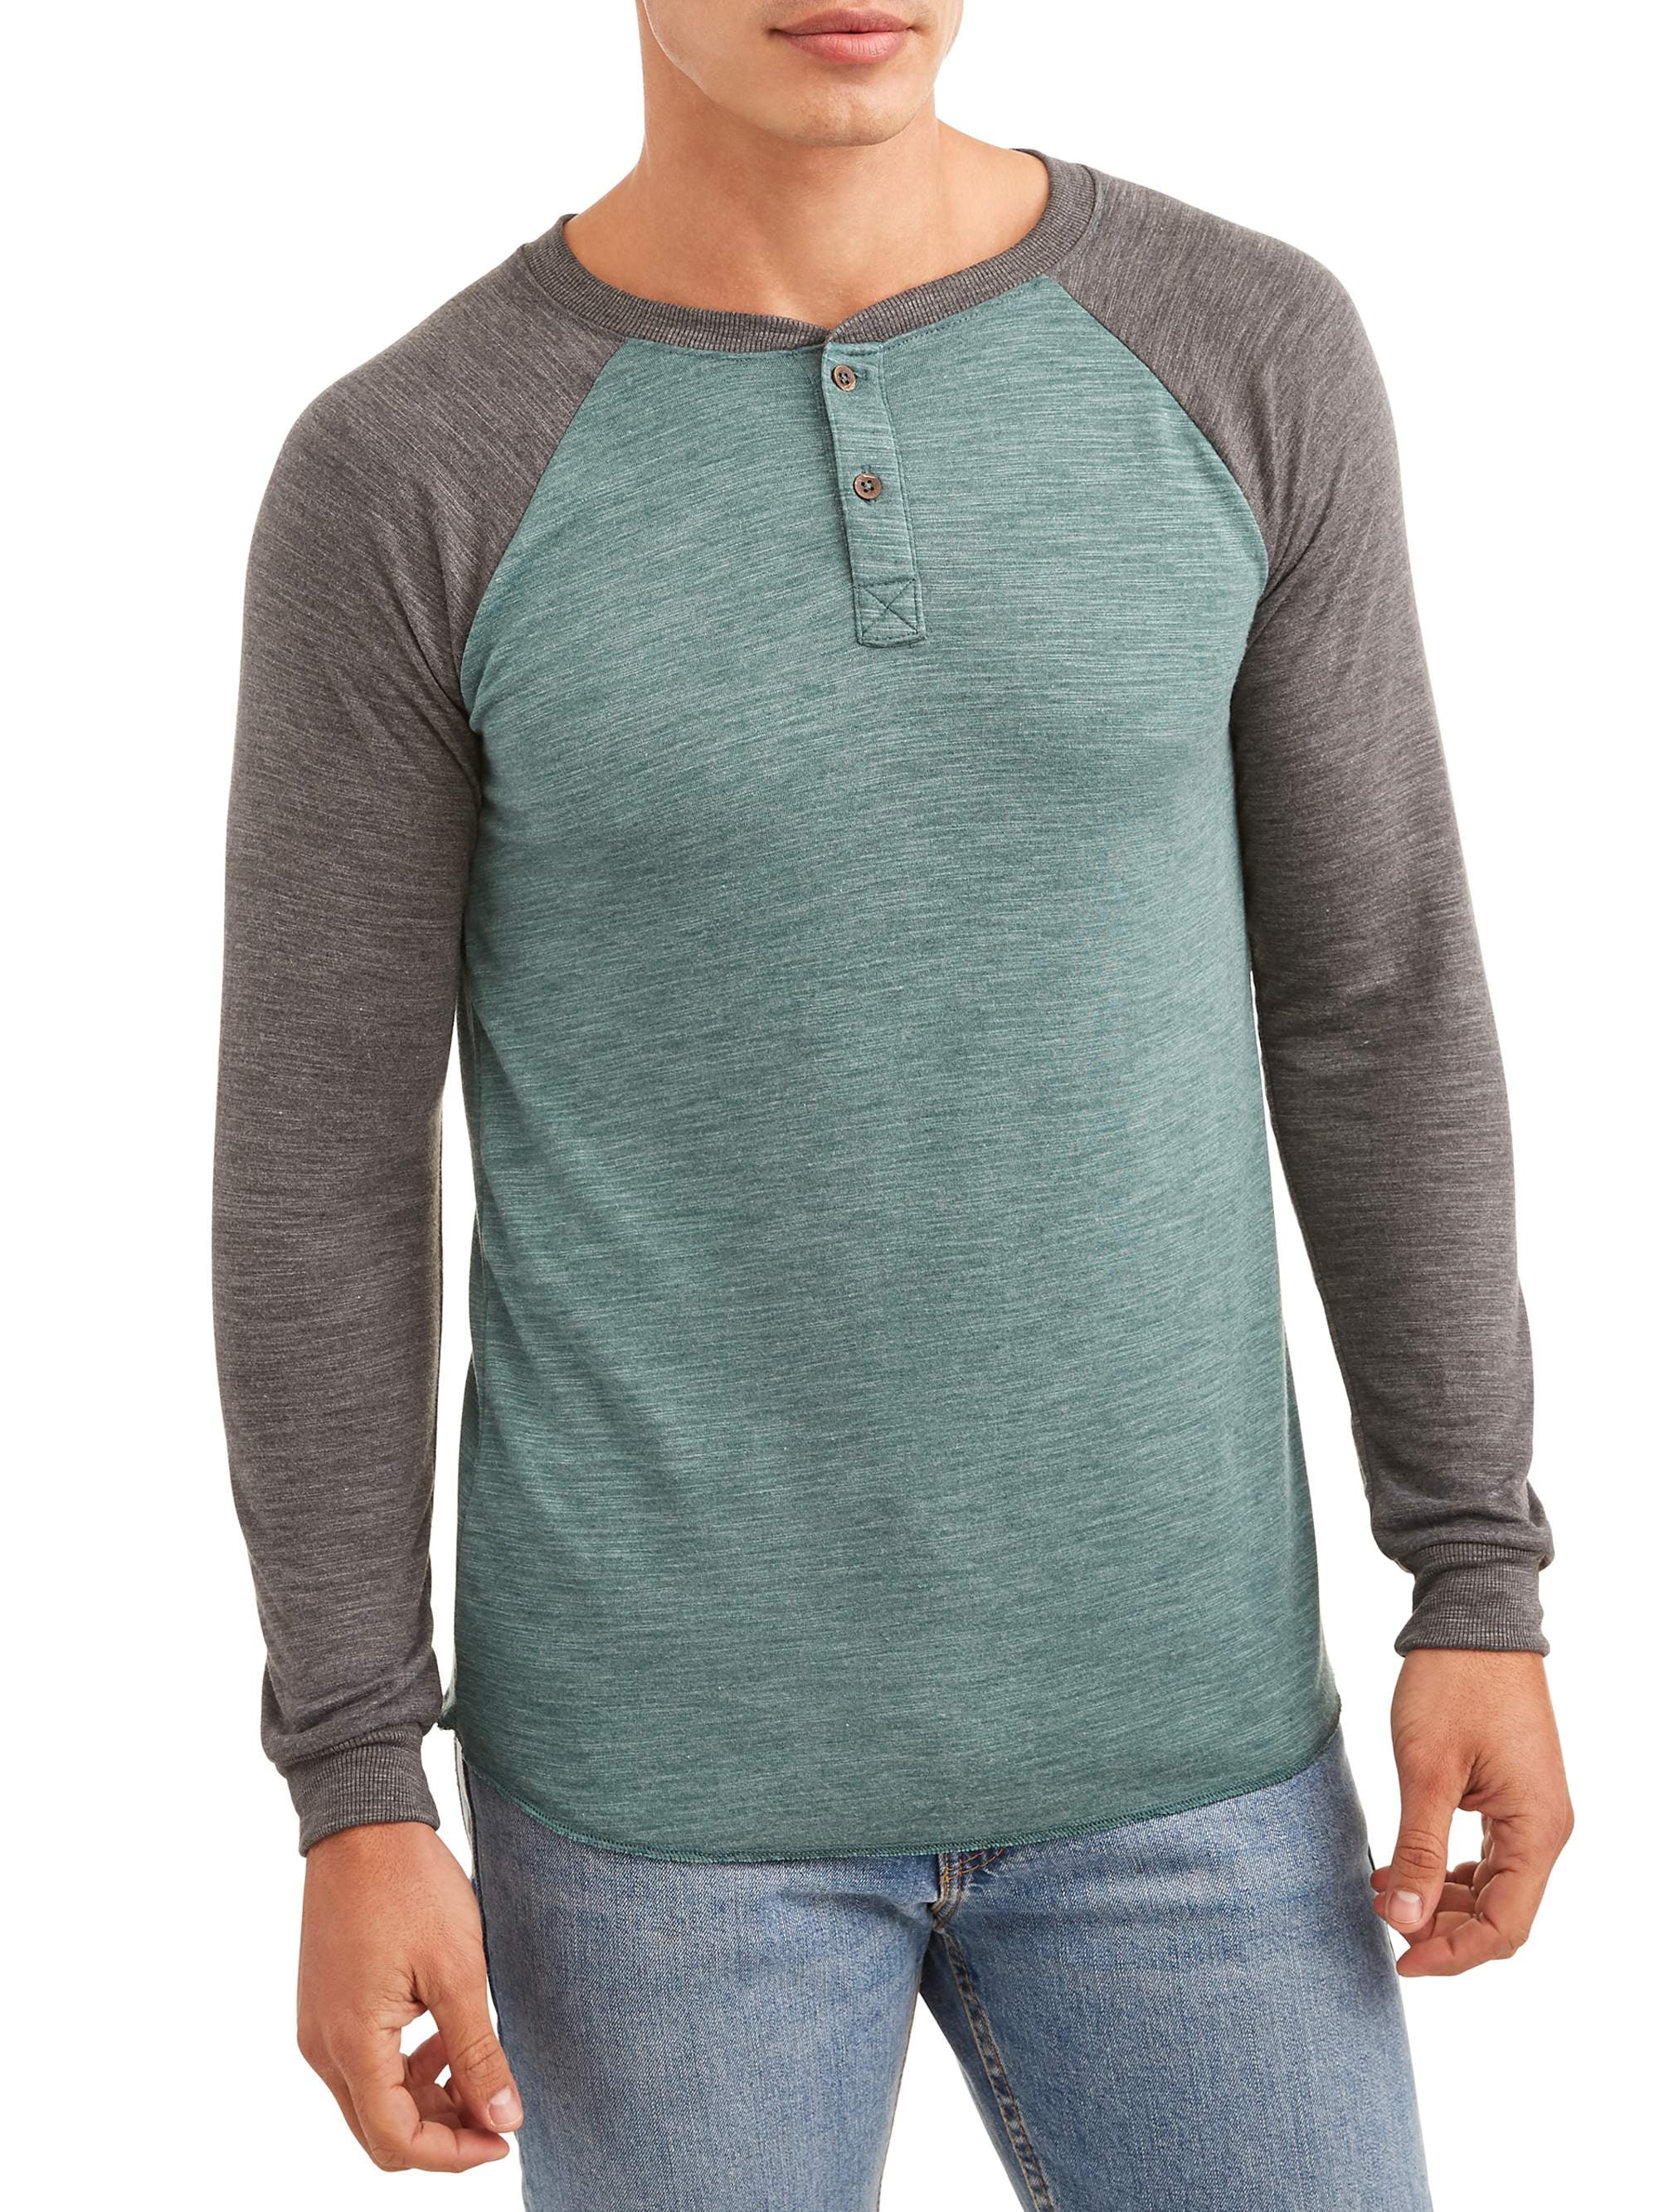 George Men's Long Sleeve Soft Double Knit Henley Raglan T-Shirt, Up to Size 5XL -